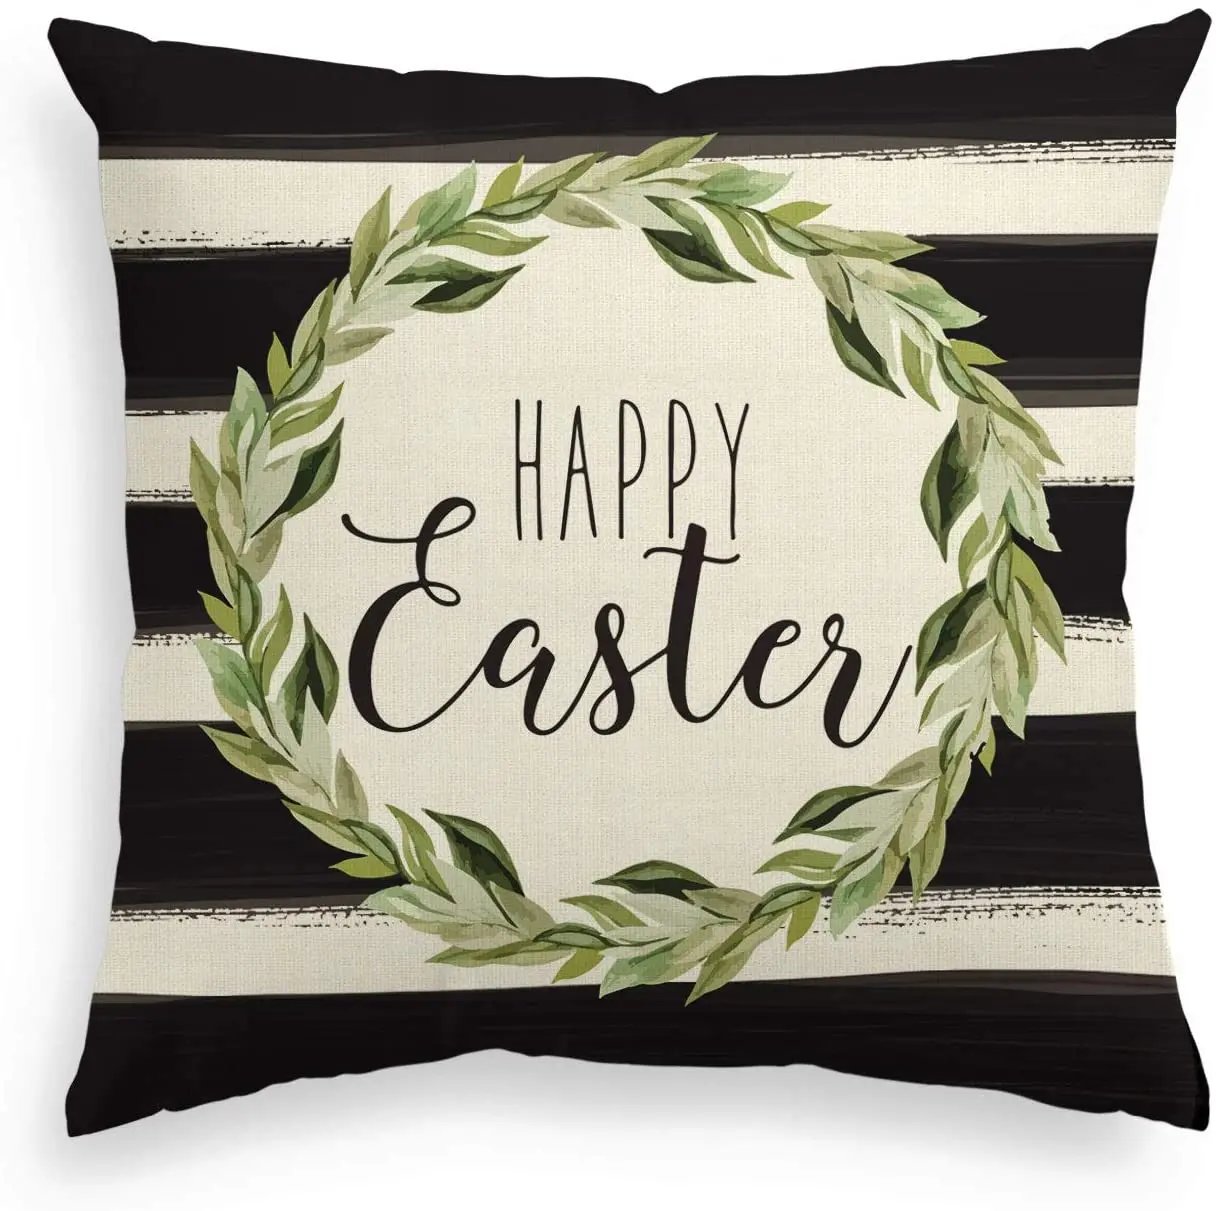 

Happy Easter Laurel Wreath Pillow Cover Watercolor Stripes Cushion Case Decoration for Sofa Couch